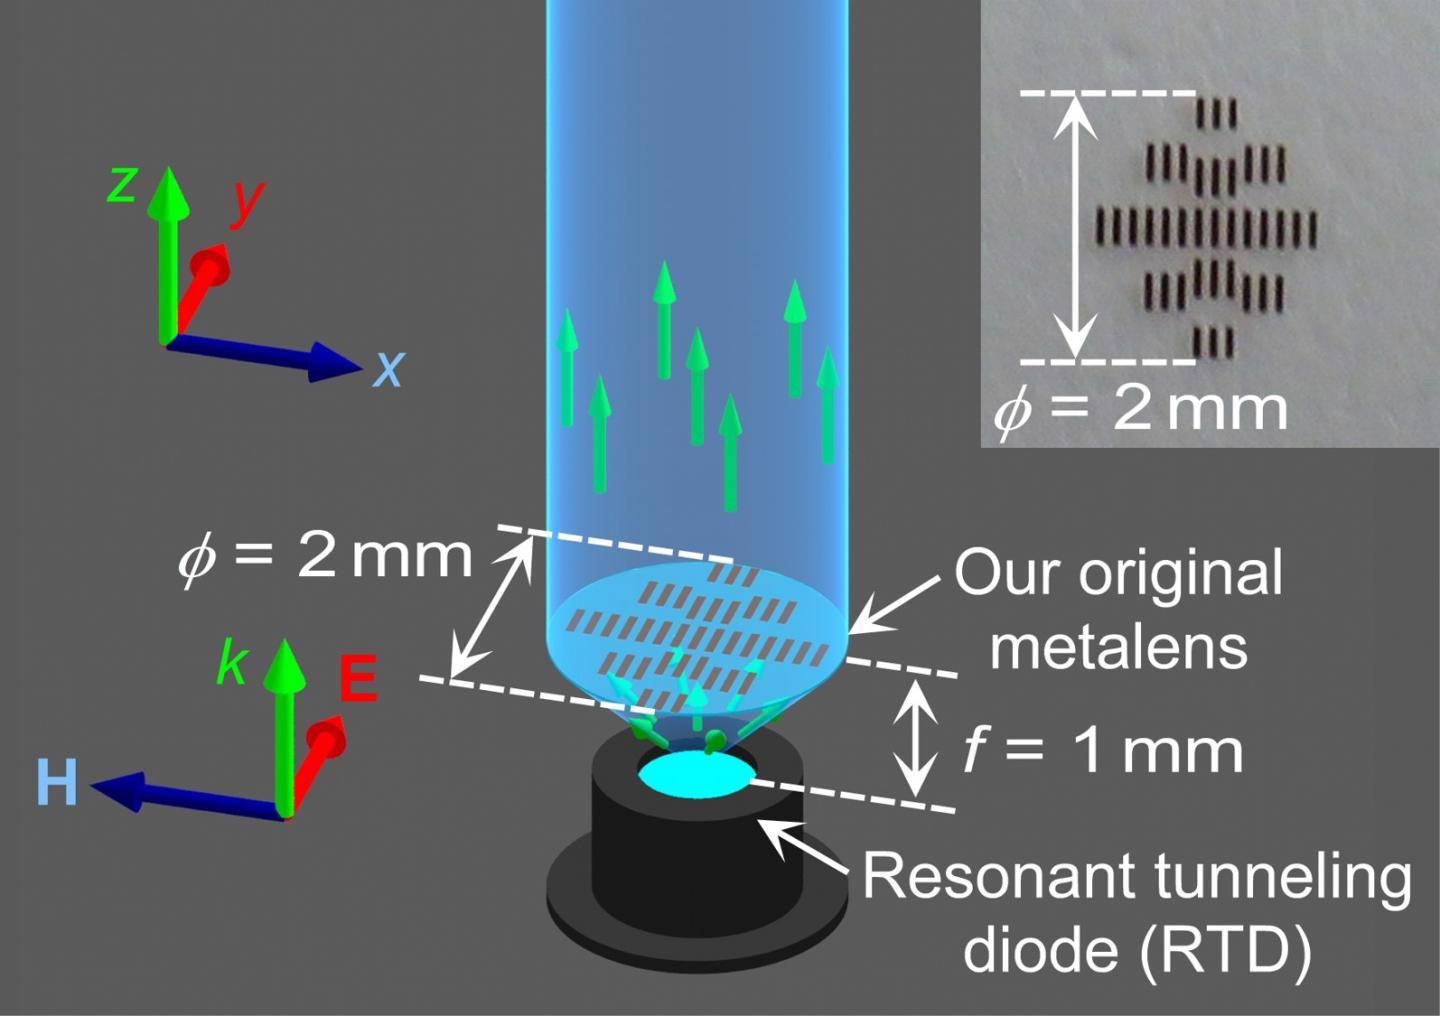 Ultra-Short Collimating Metalens Could Promote Wireless Communications